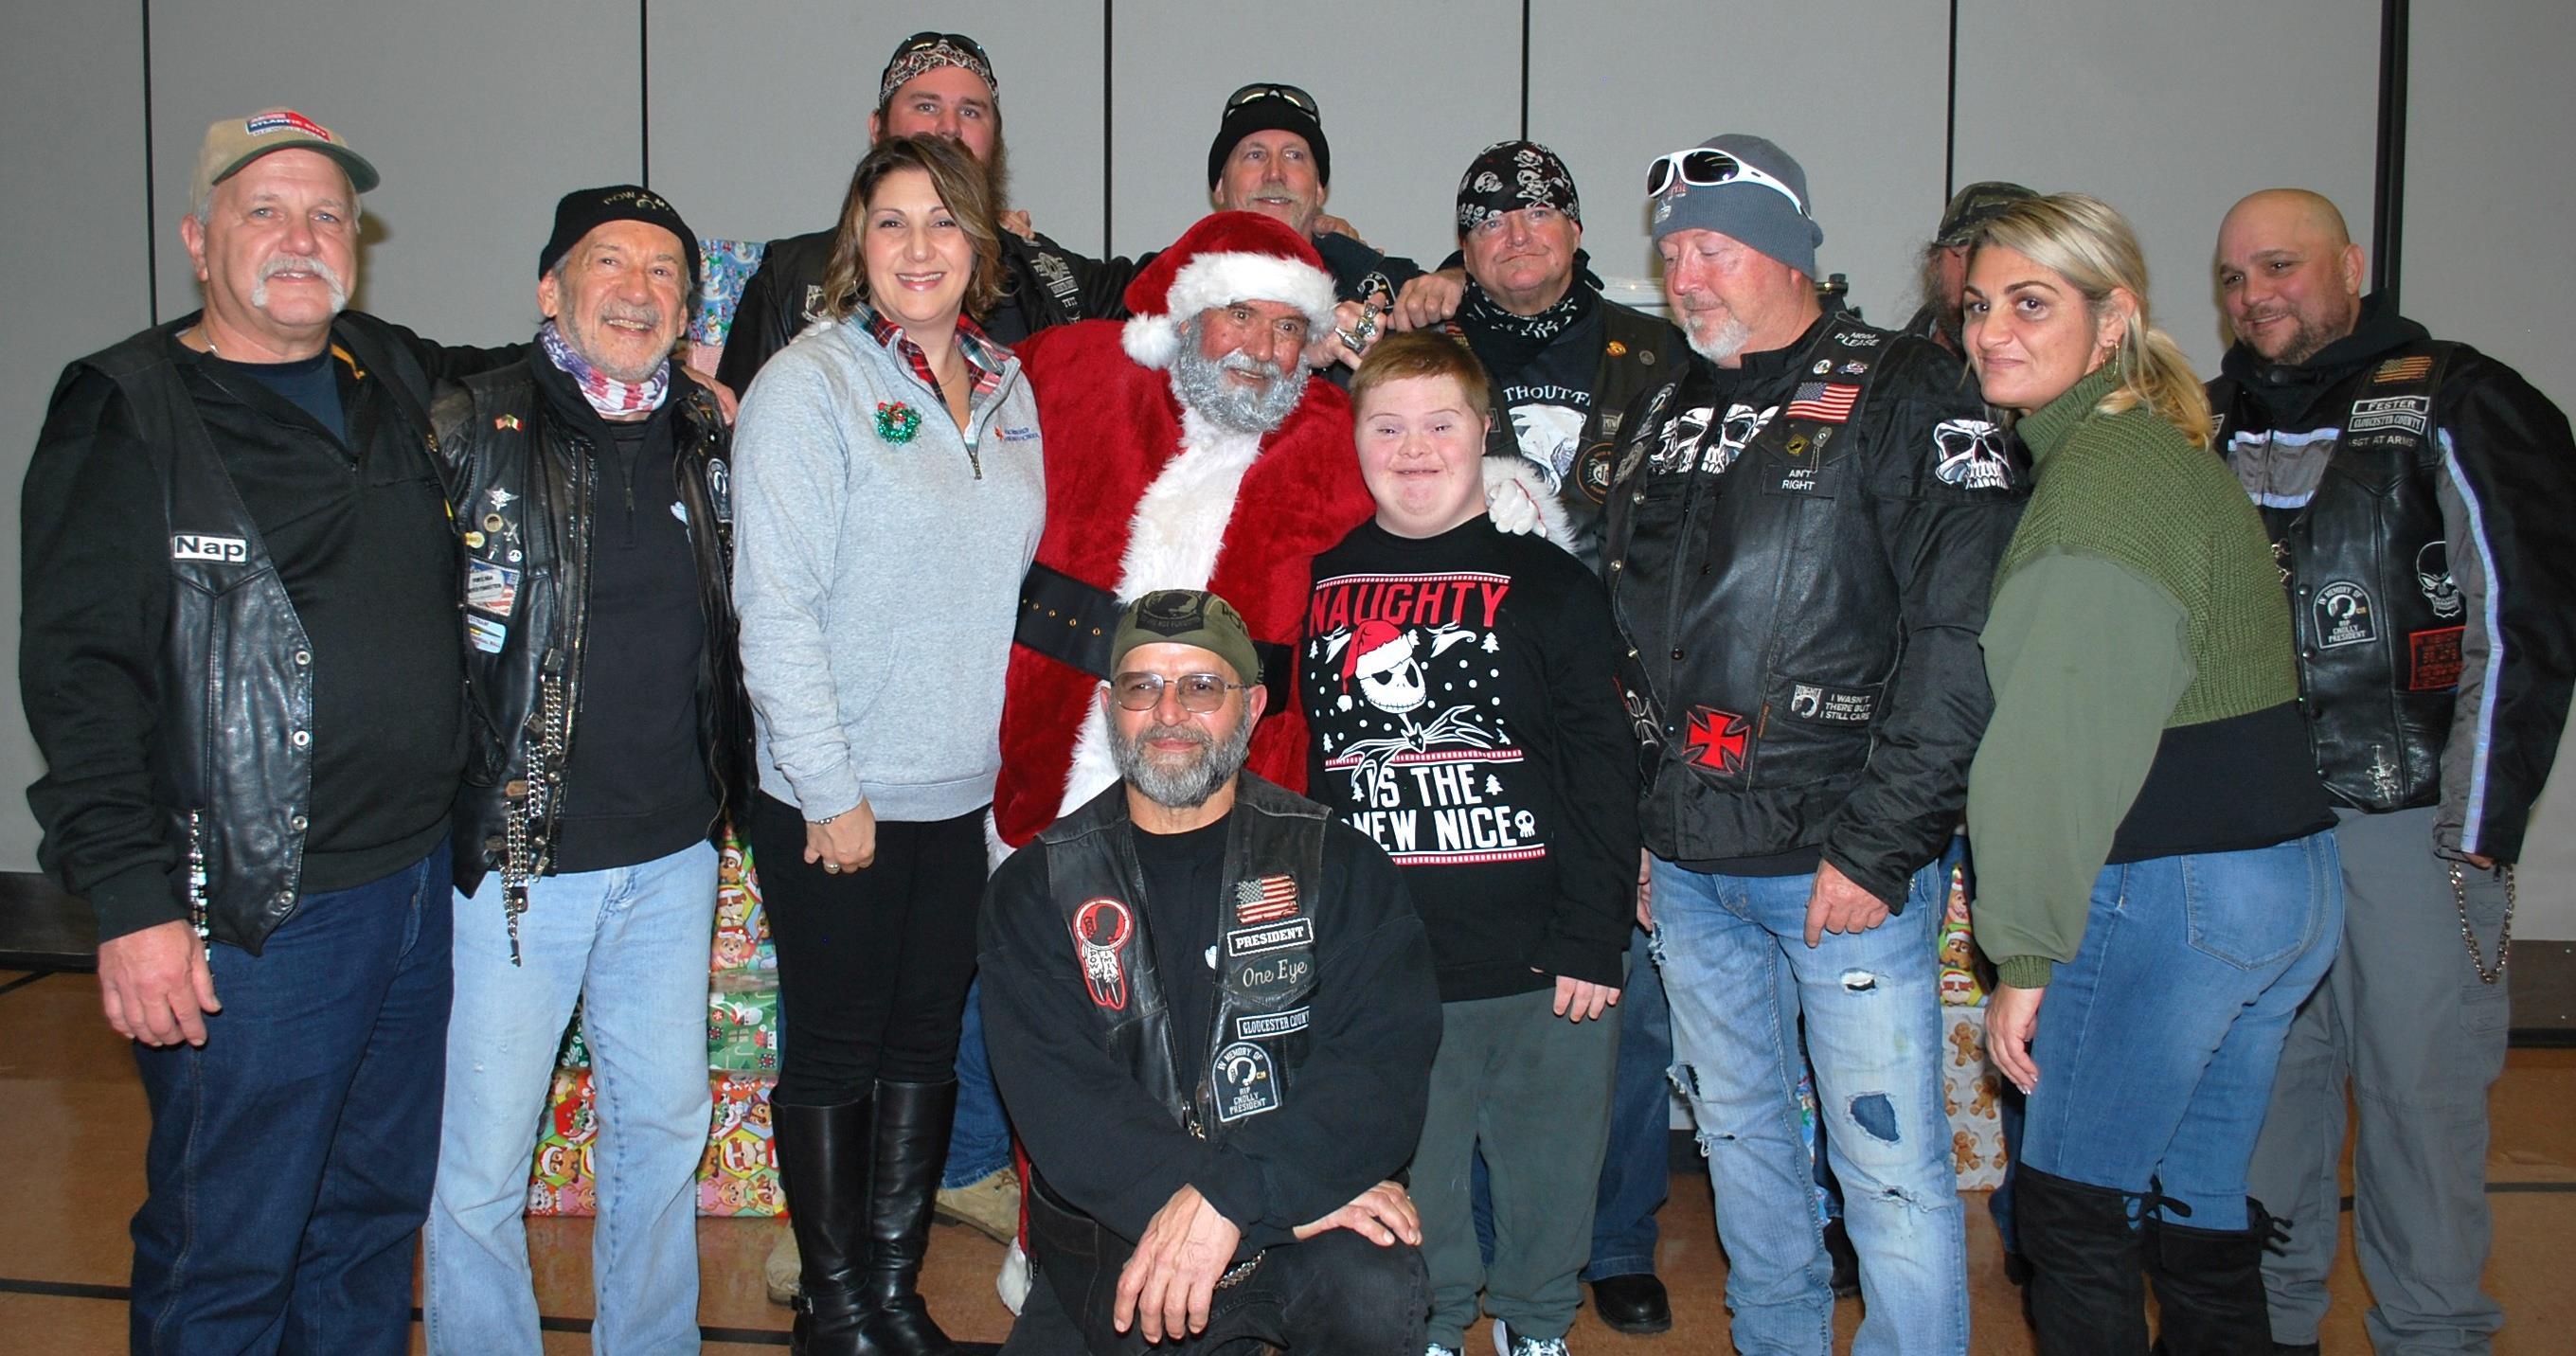 POW MIA Motorcycle Club with ADS Executive Director and student